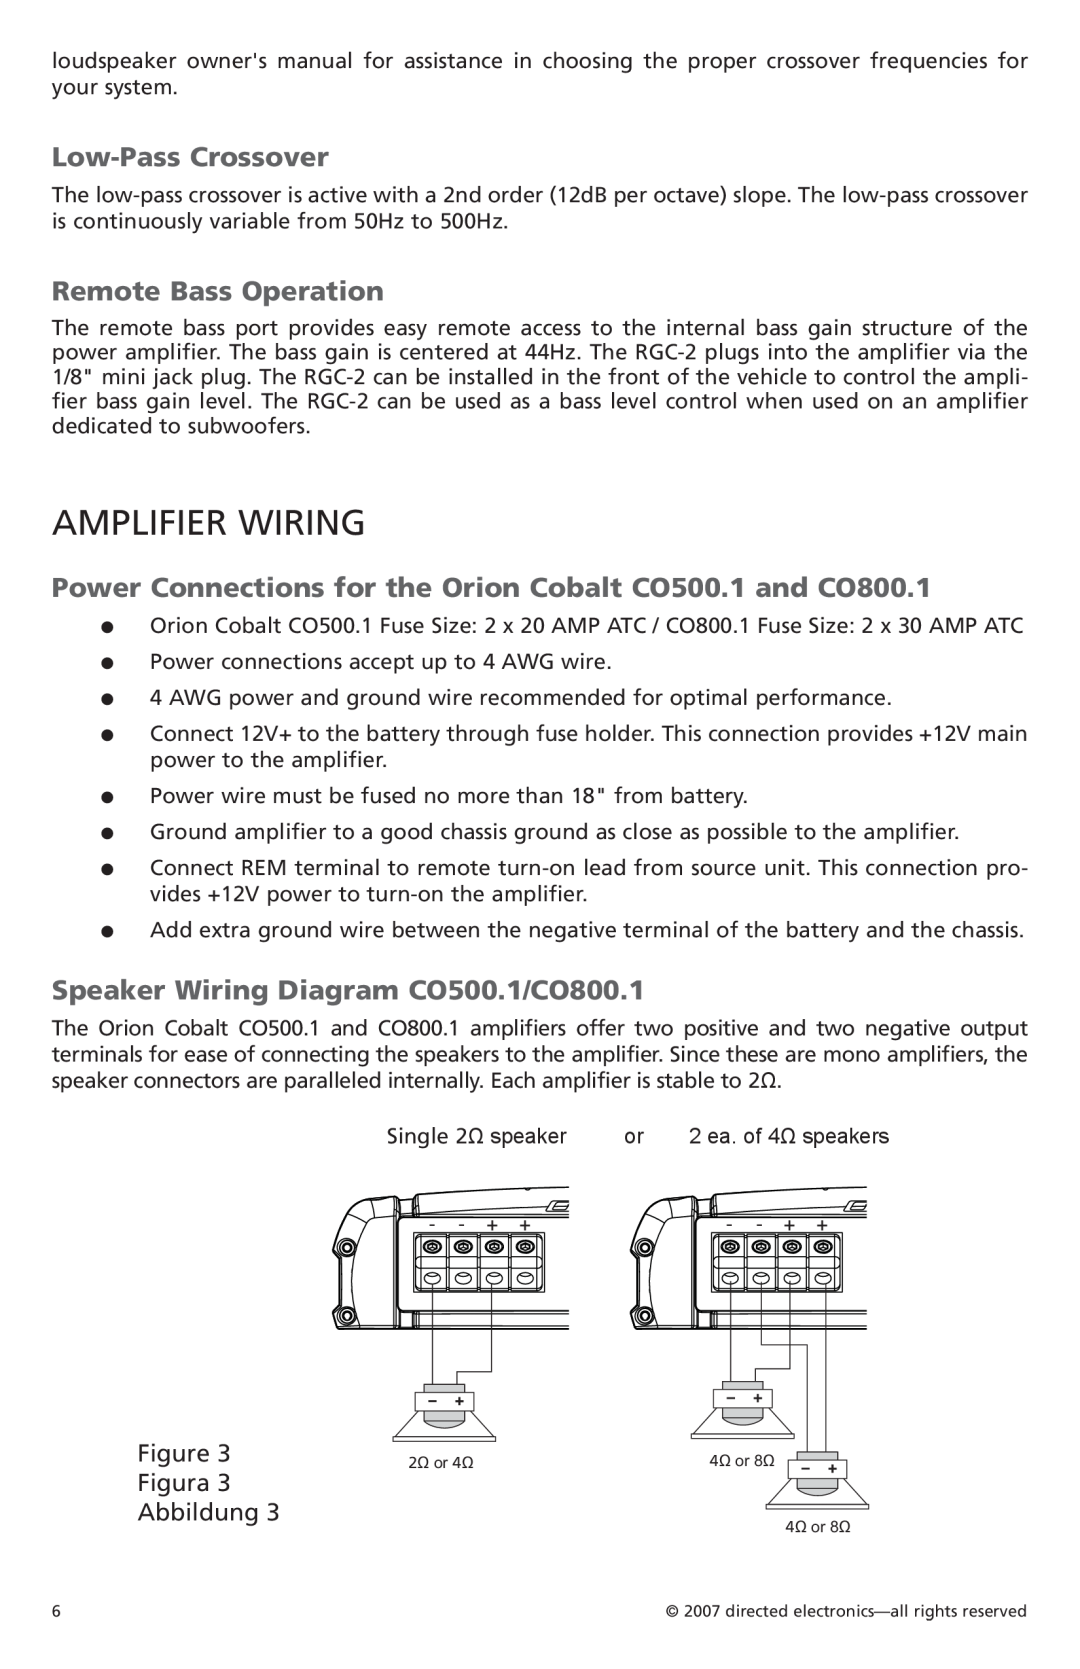 Orion Car Audio CO500.1, CO800.1 owner manual Amplifier Wiring, Low-Pass Crossover, Remote Bass Operation, Figura Abbildung 